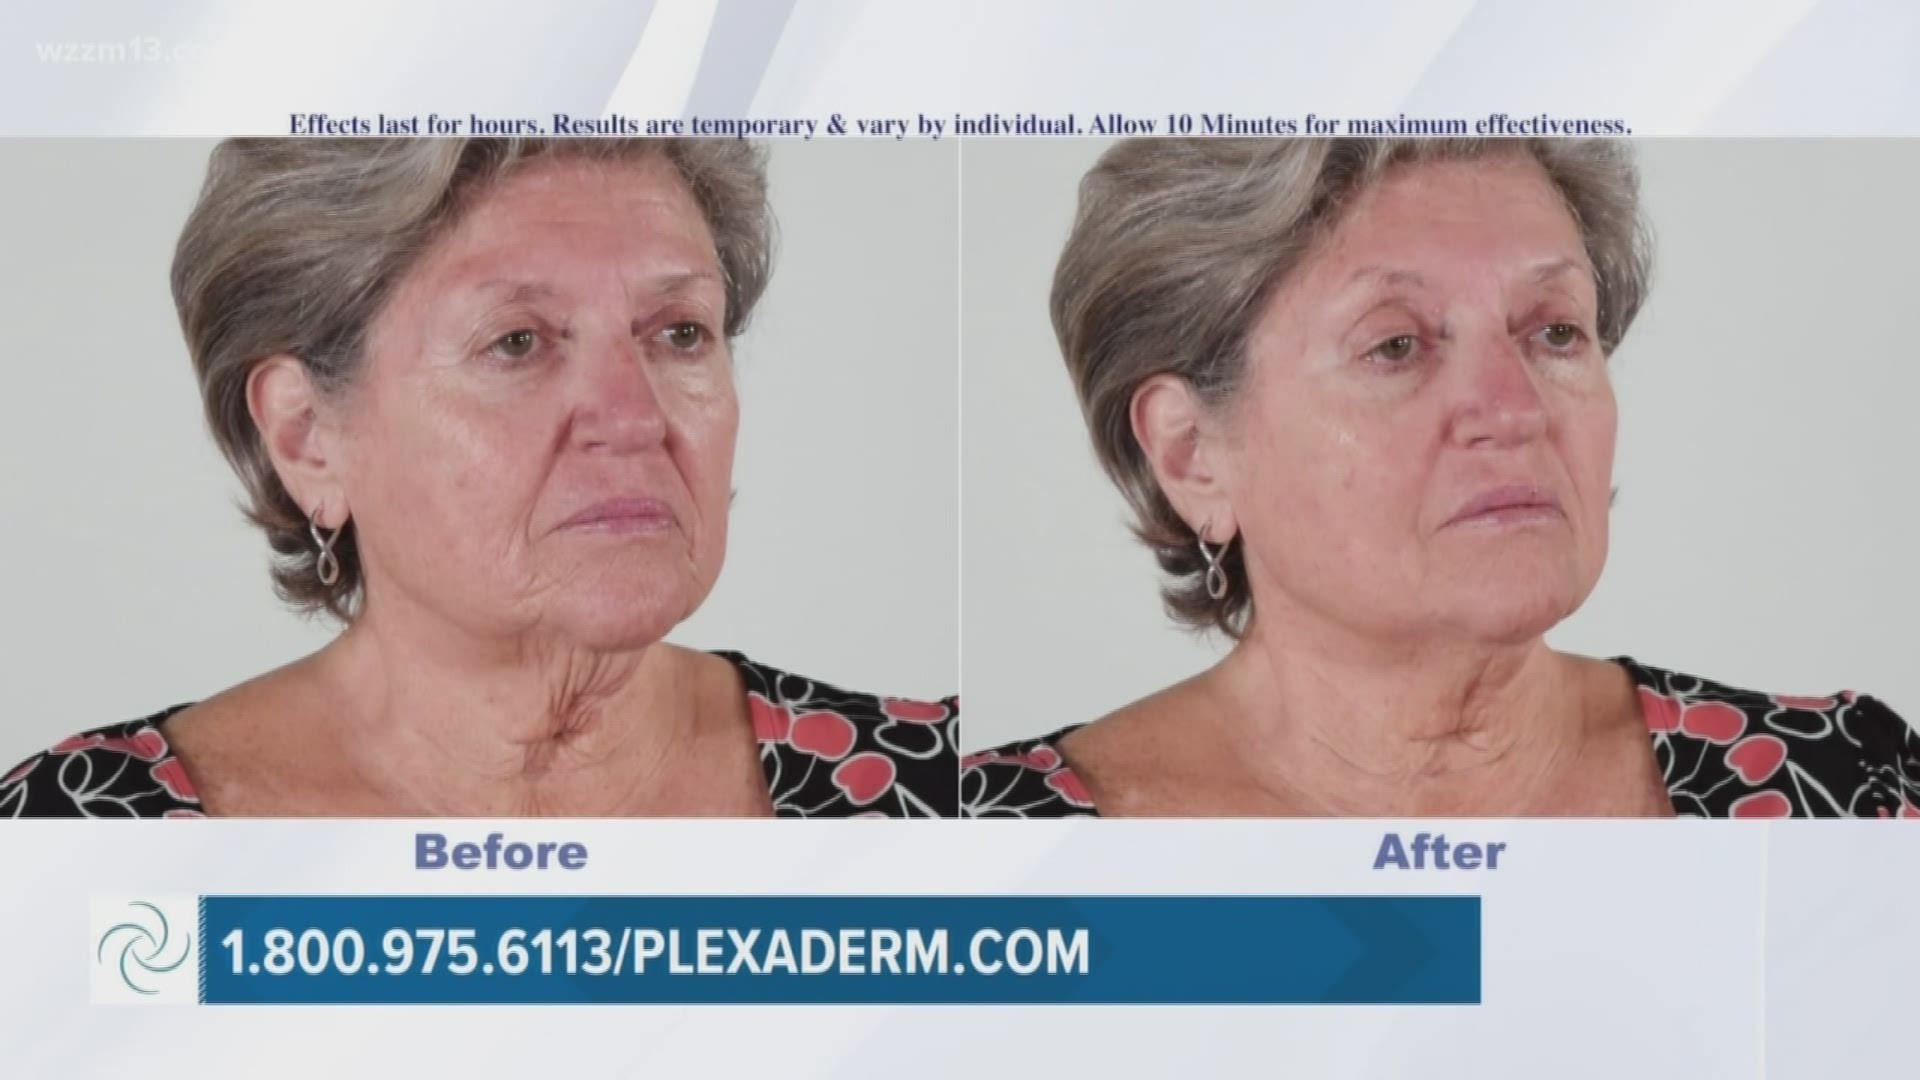 Change the way you look in the mirror this New Year with Plexaderm.